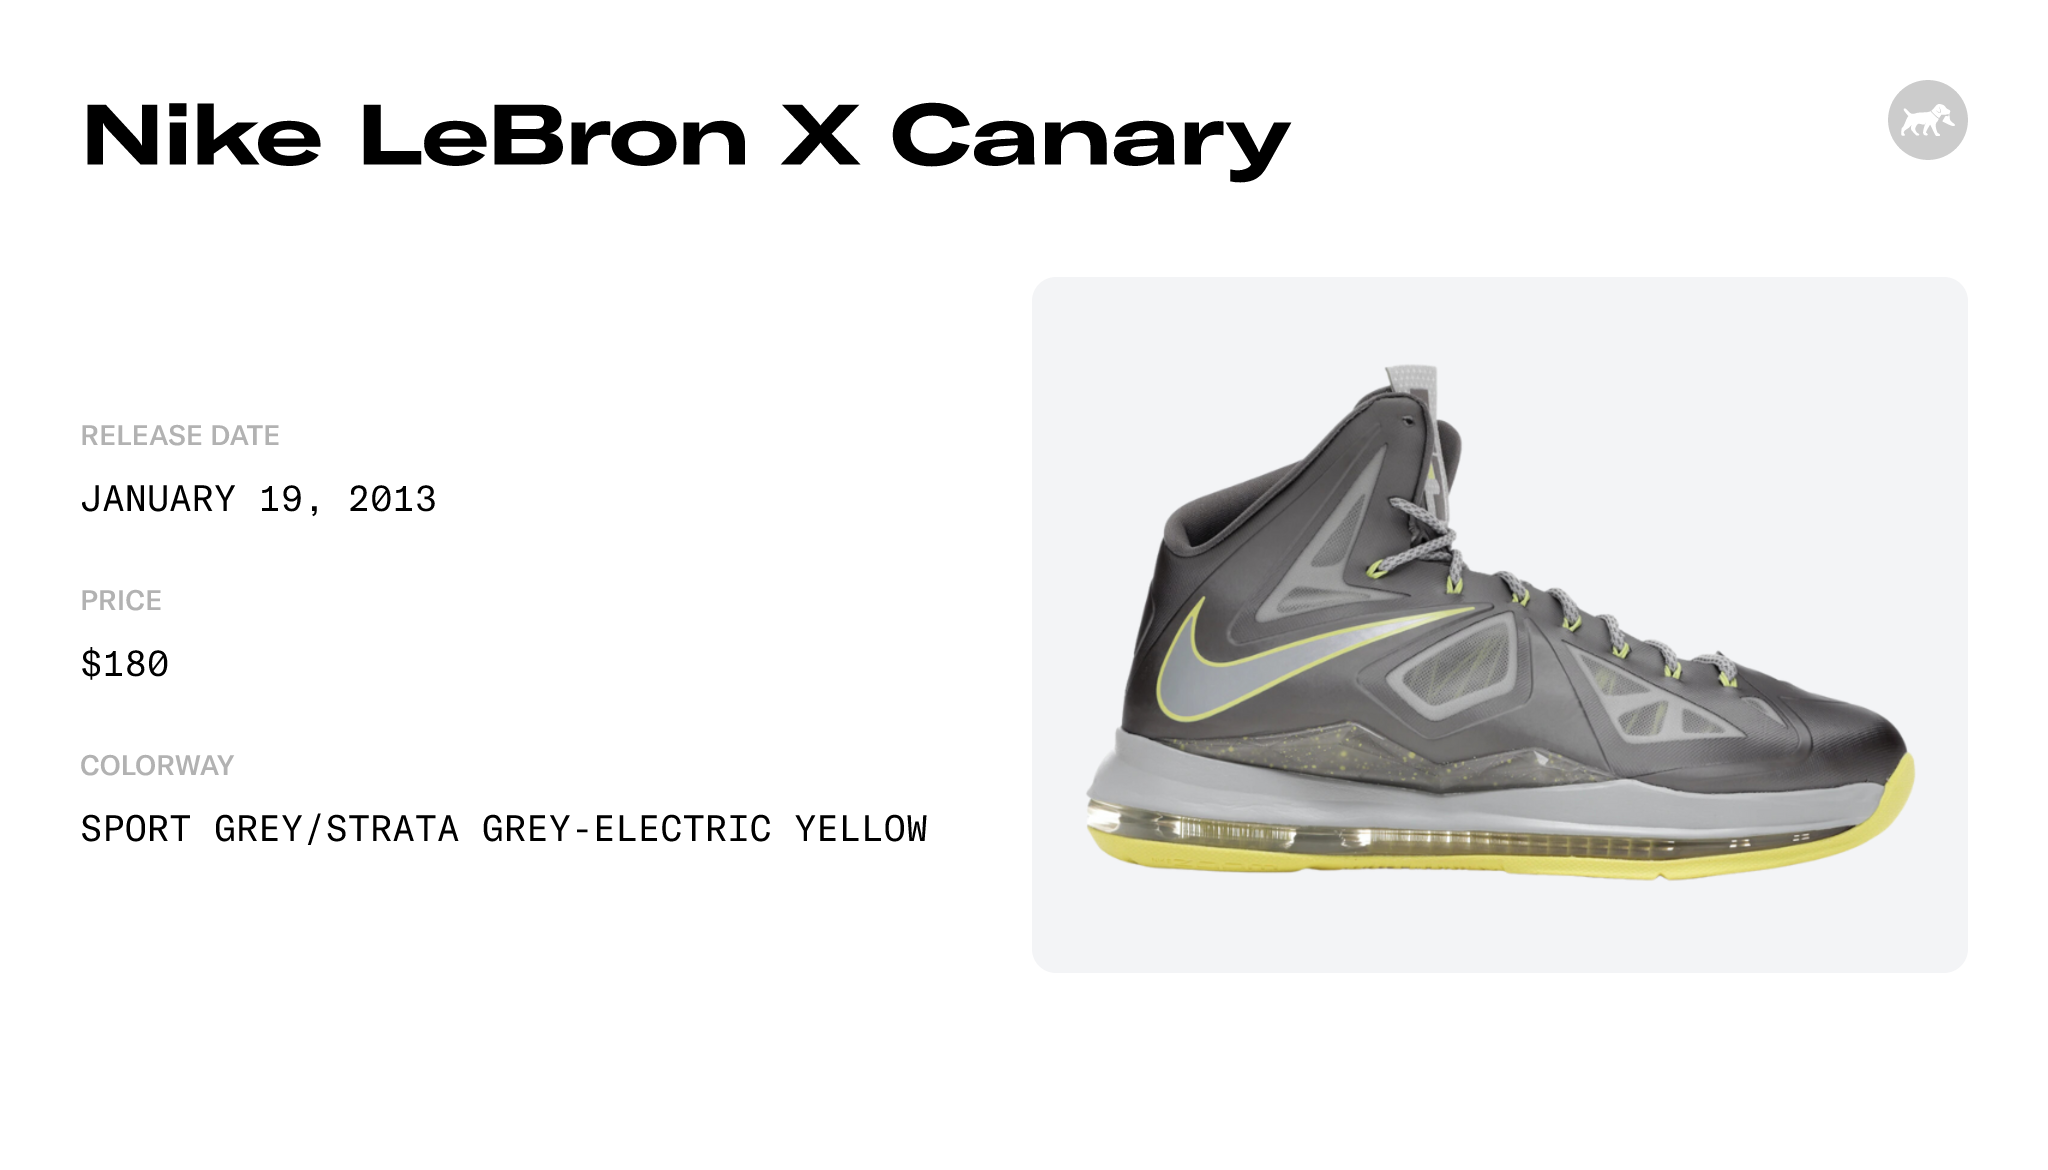 Nike LeBron X Canary - 541100-007 Raffles and Release Date